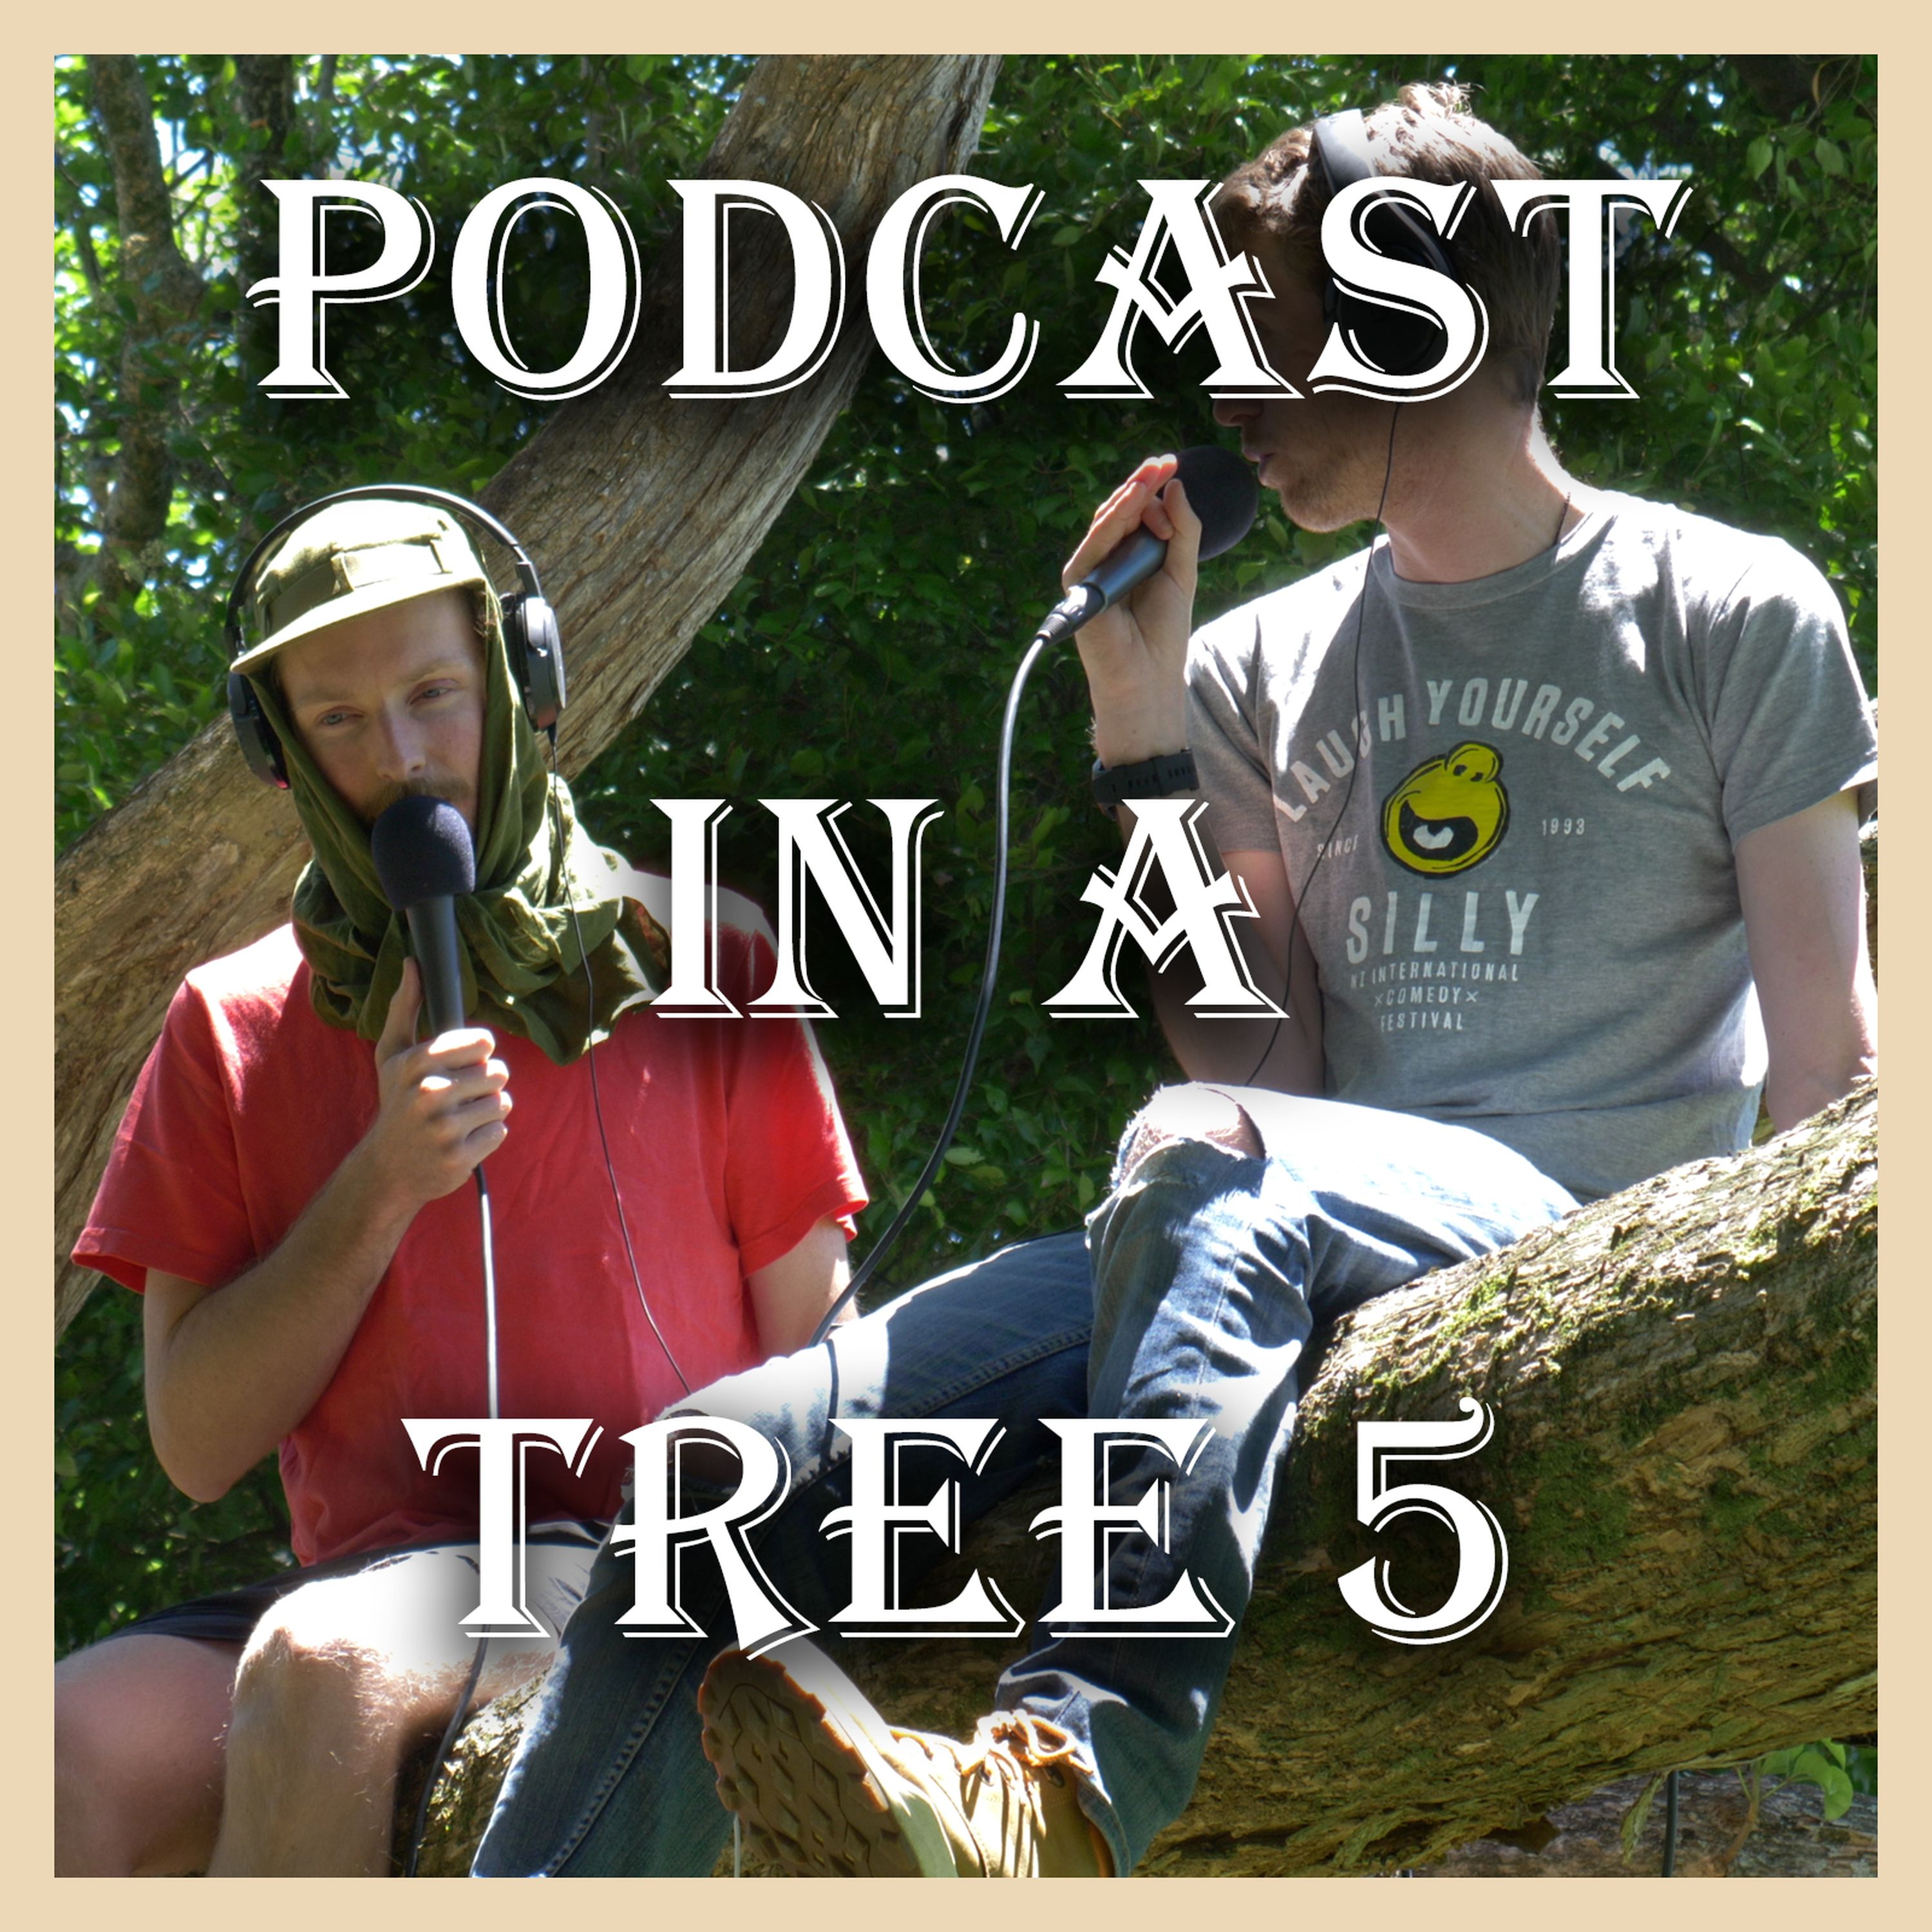 Podcast In A Tree 5